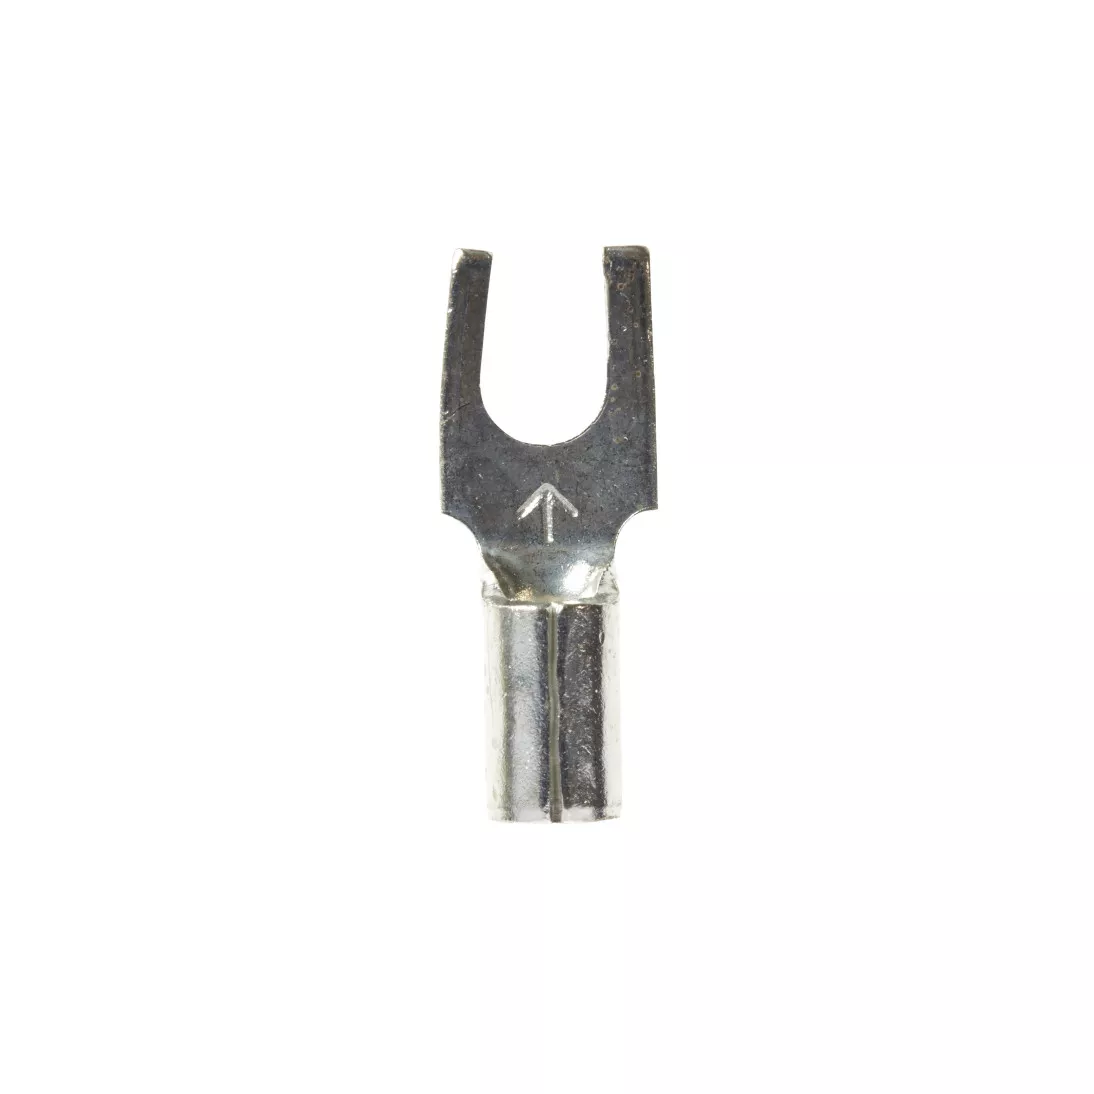 3M™ Scotchlok™ Block Fork, Non-Insulated Butted Seam MU14-6FB/SK, Stud
Size 6, suitable for use in a terminal block, 1000/Case